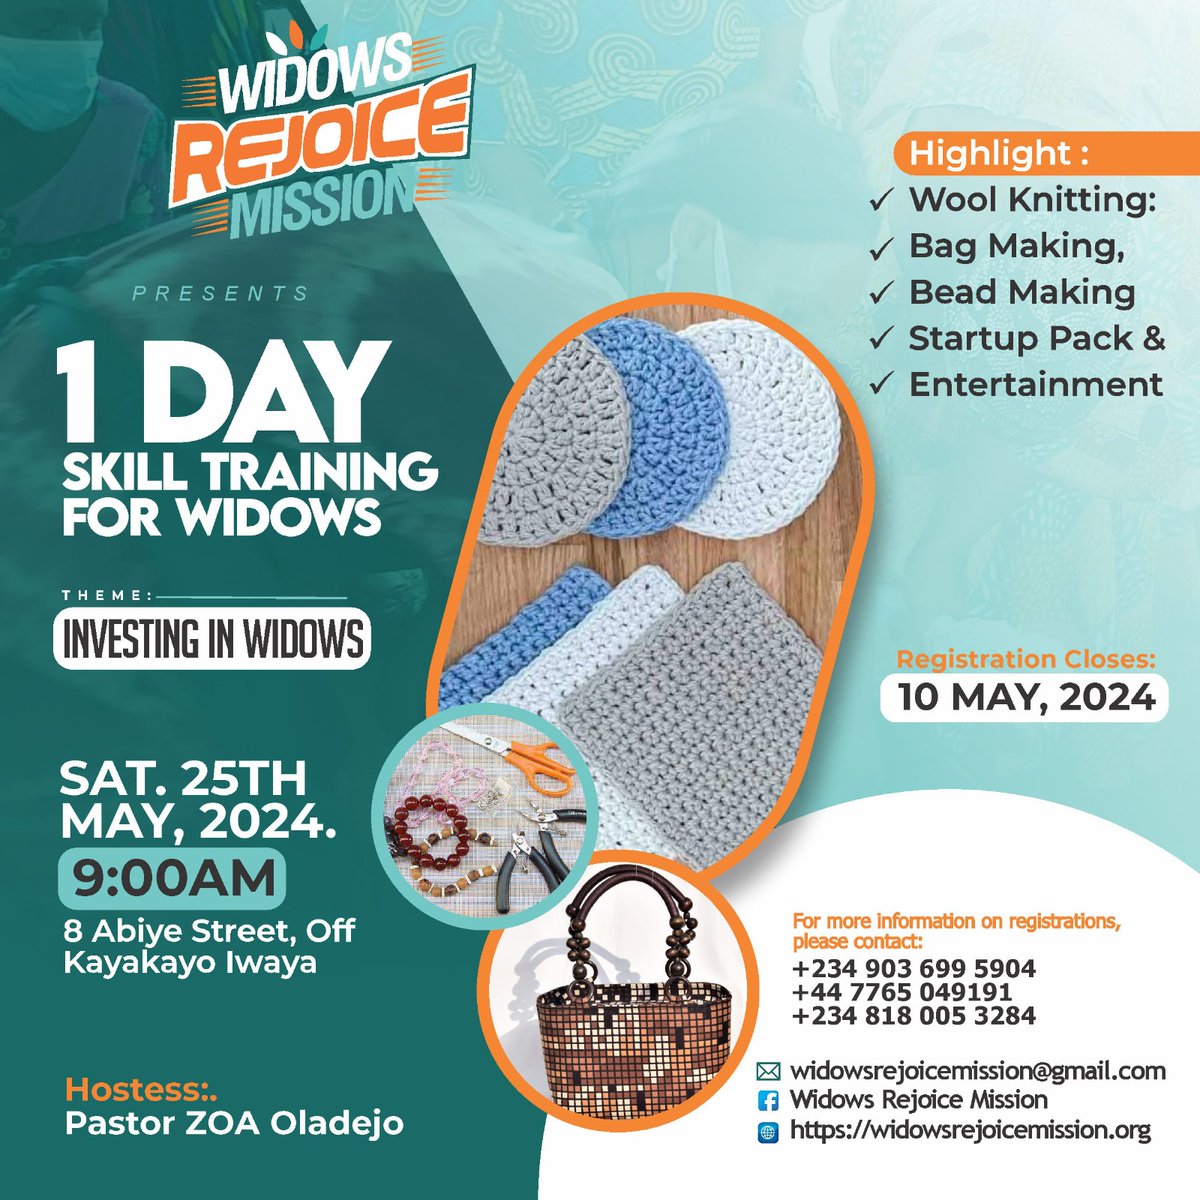 We are ready to train Widows at #MAKOKO and #IWAYA area of #Lagos. Date: 25th May, 2024 Time: 9am Venue: 8 Abiye Street, IWAYA , Lagos. Highlight: Bag Making, Wool Knitting. Bead Making, STARTUP PACK, Entertainment.... For more details and sponsorship, contact: Telephone 📞 :…